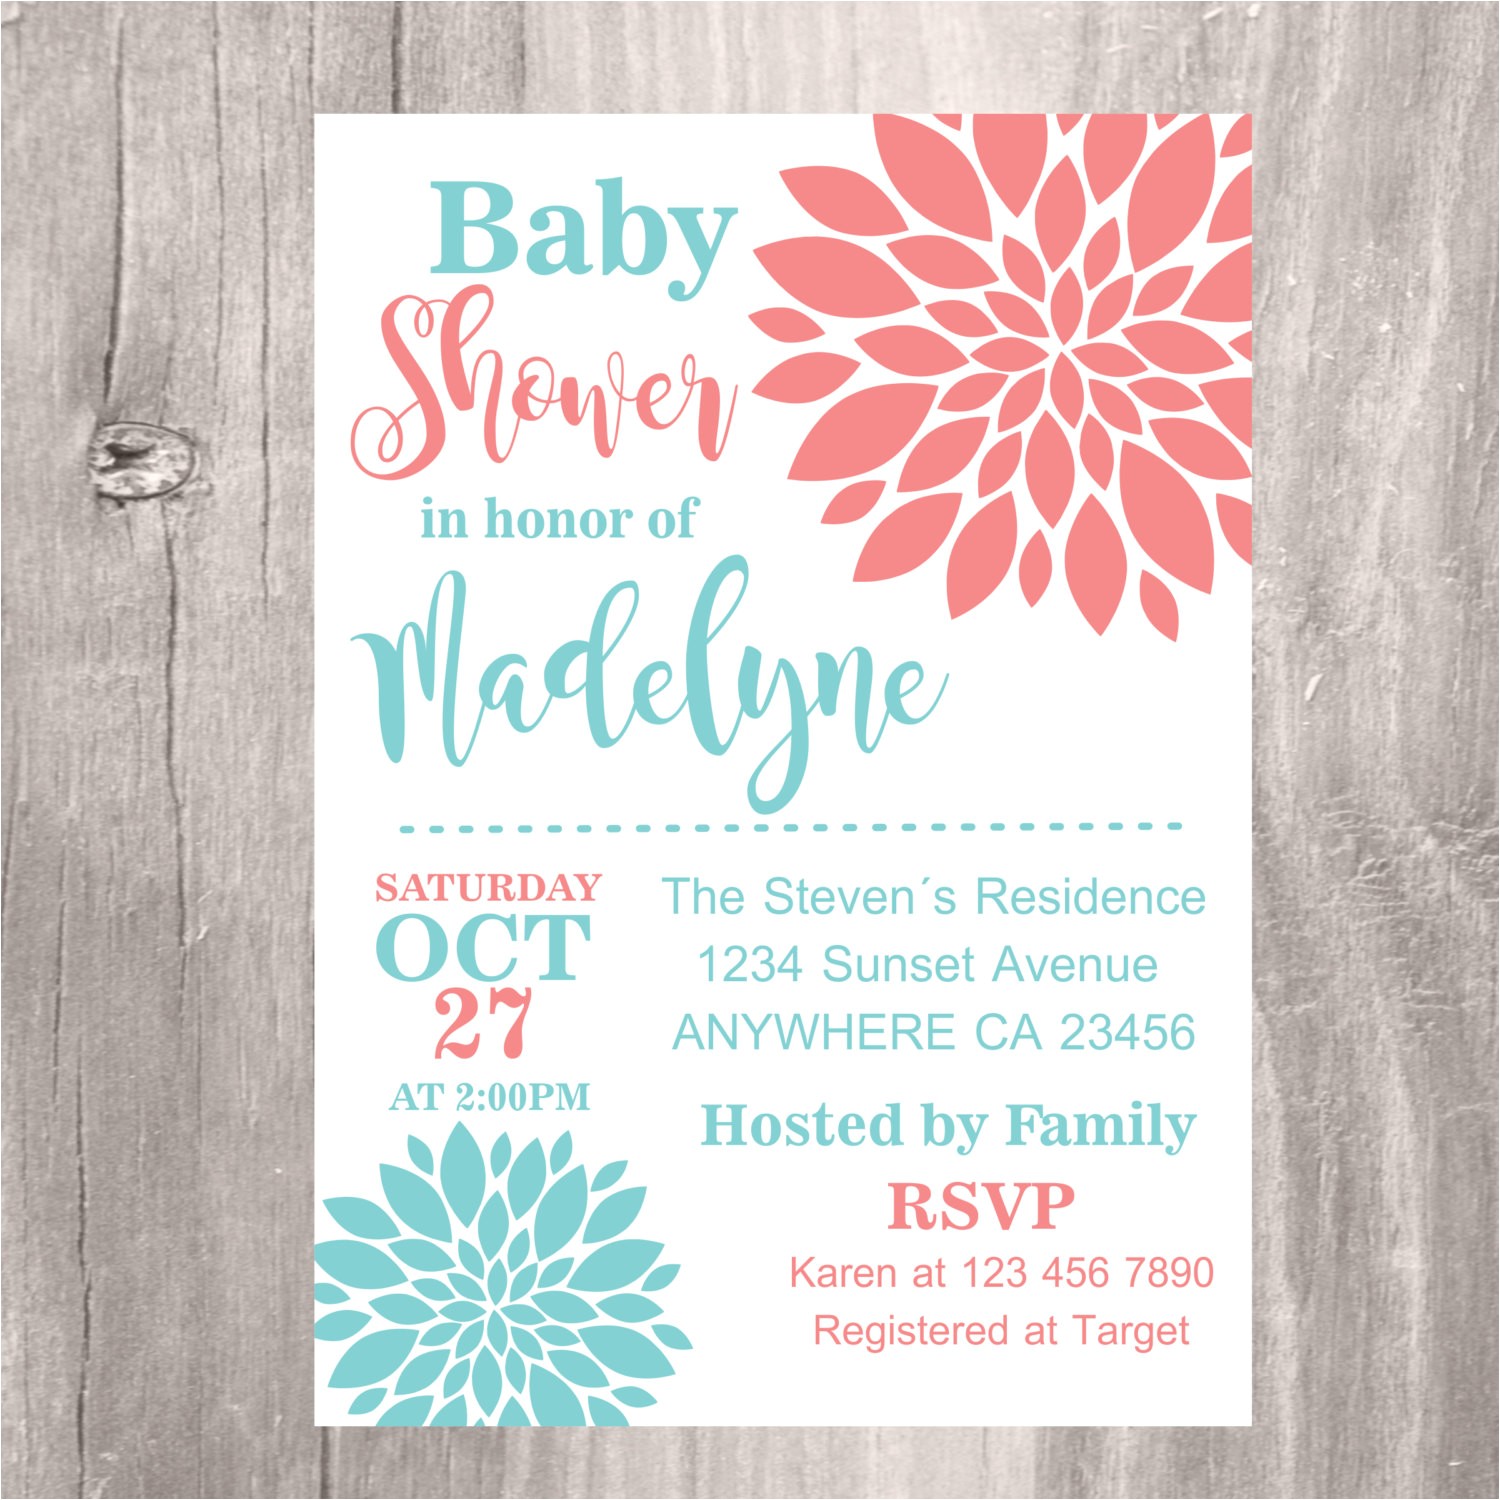 Coral and Teal Baby Shower Invitations Baby Shower Invitation Coral and Teal Baby Shower Invite